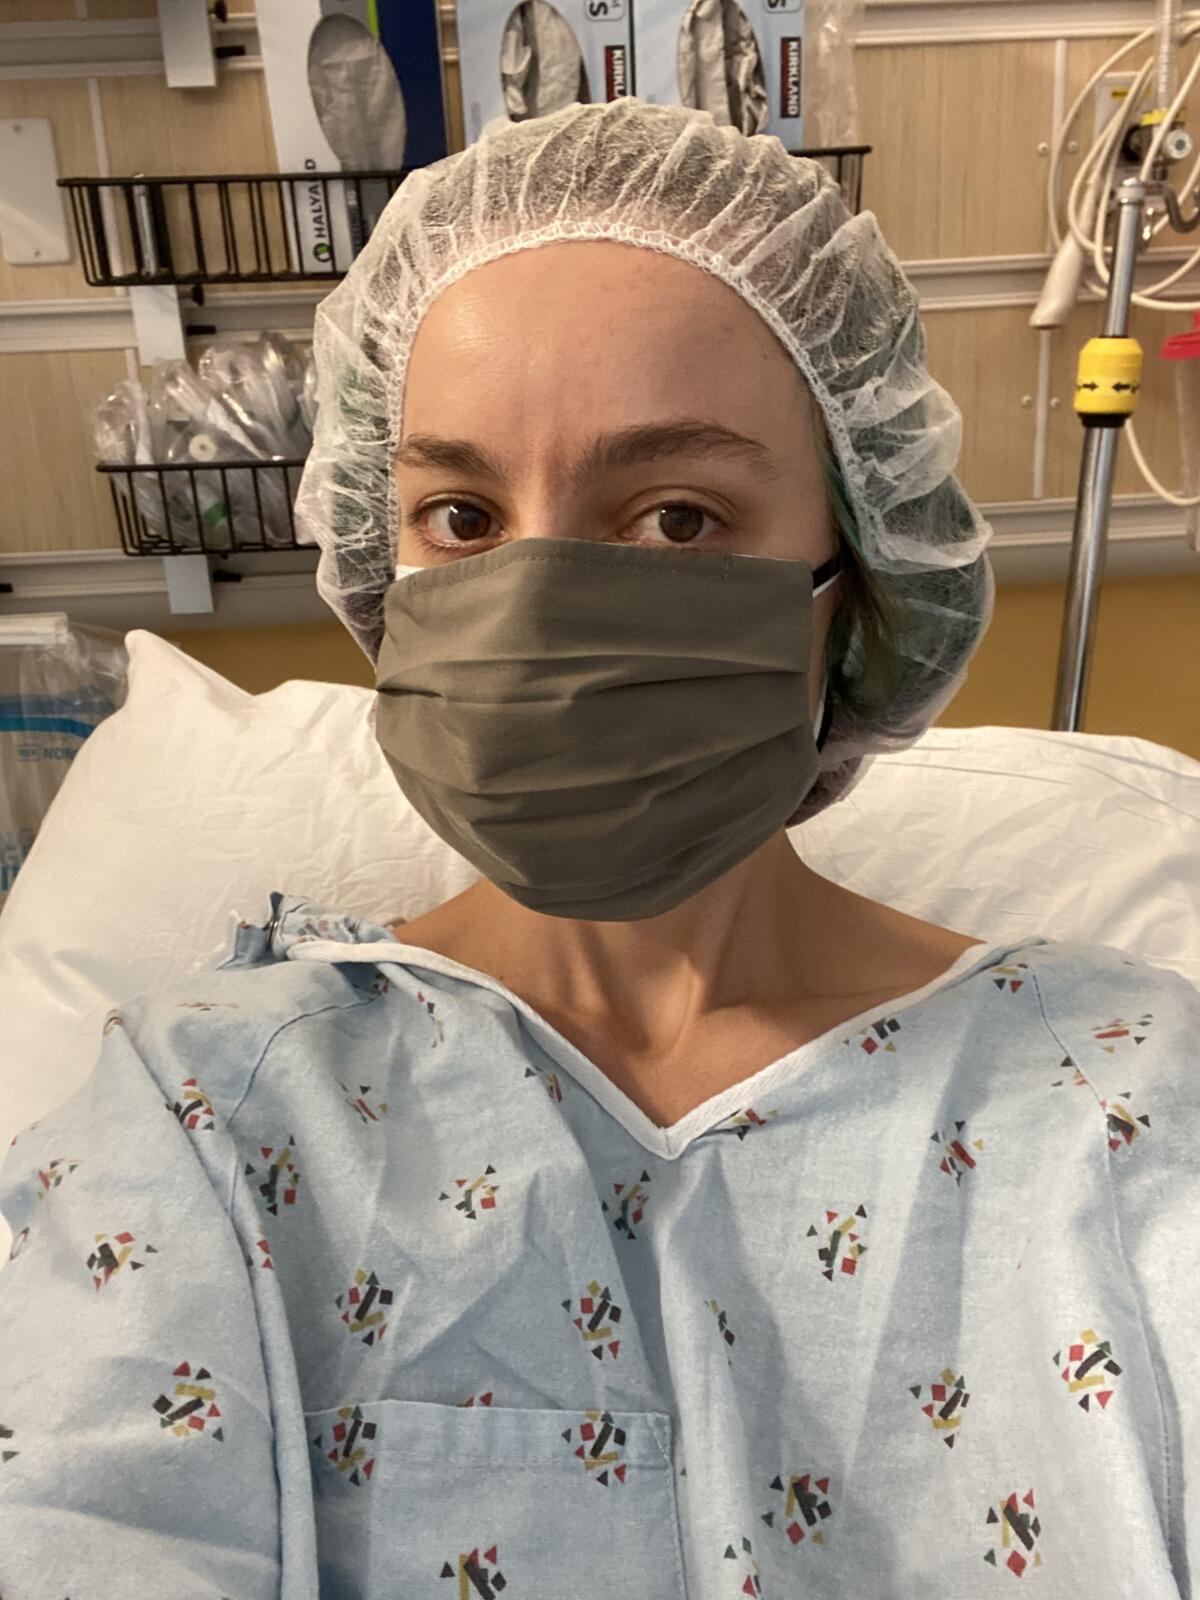 Katie McKnight wearing a mask and hospital gown